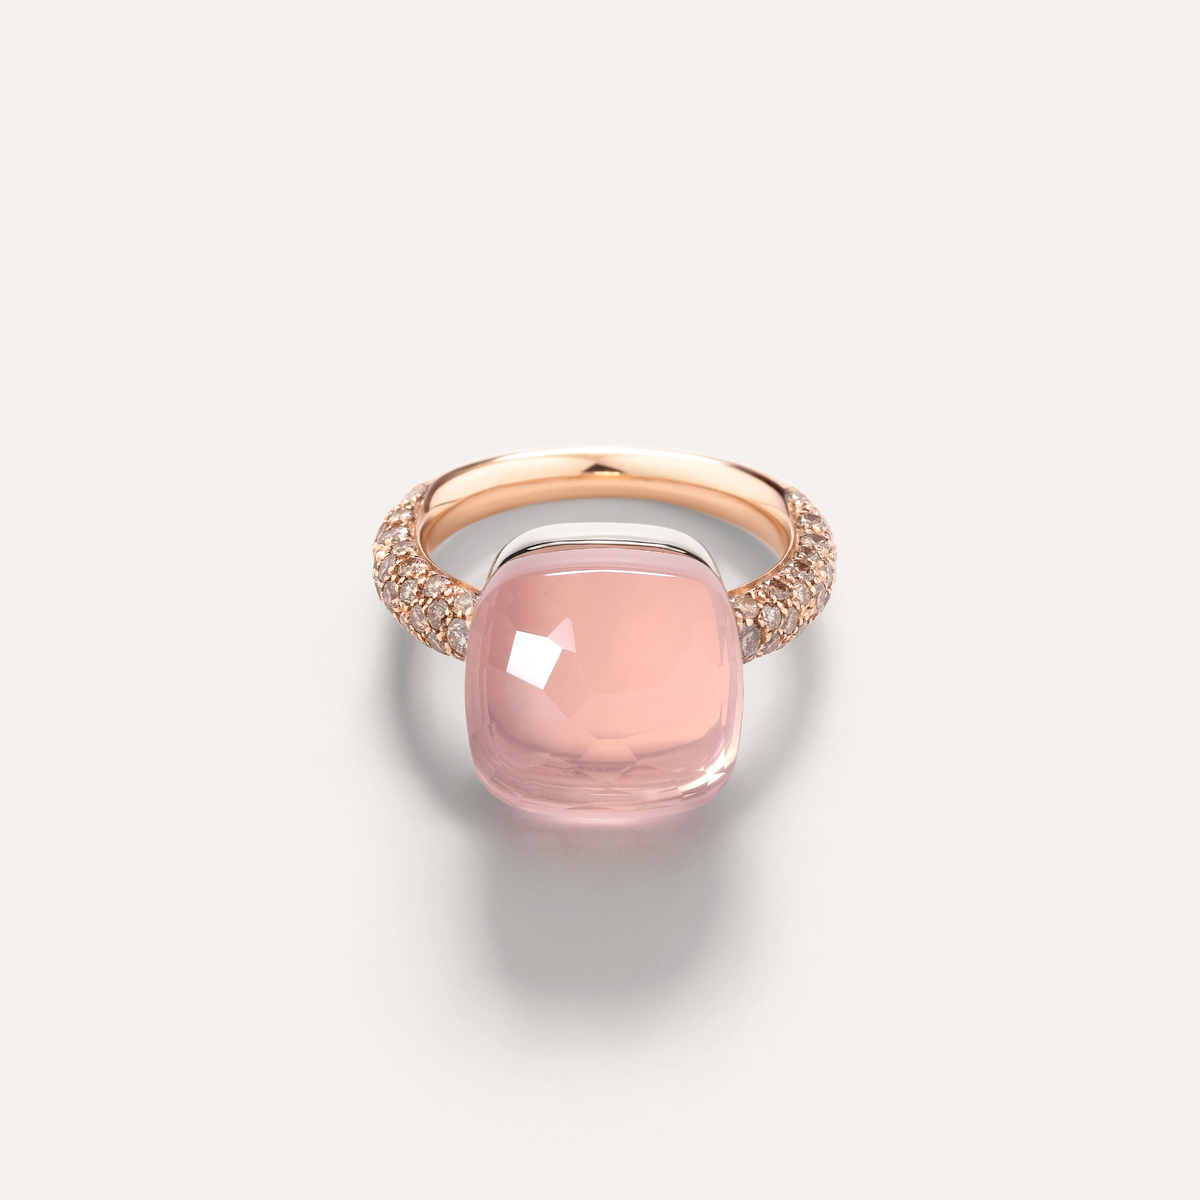 Maxi Nudo ring in 18k rose gold with brown diamonds and Rose quartz